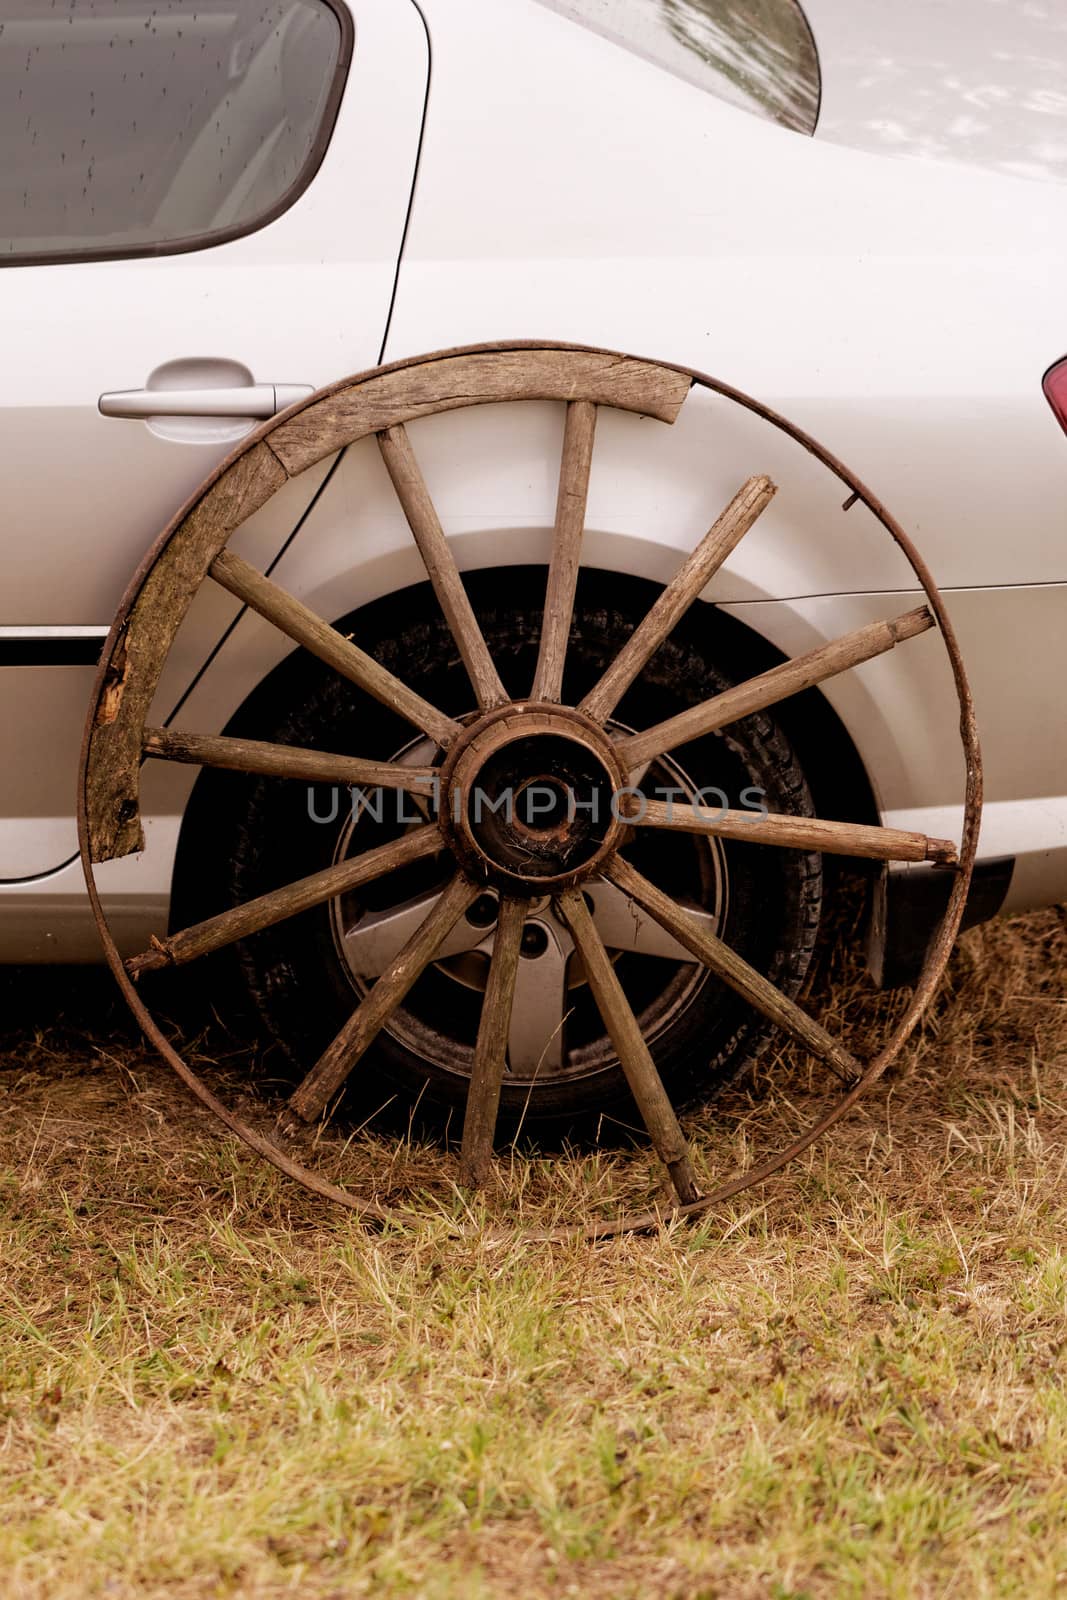 old broken wagon wheel side by new cars back